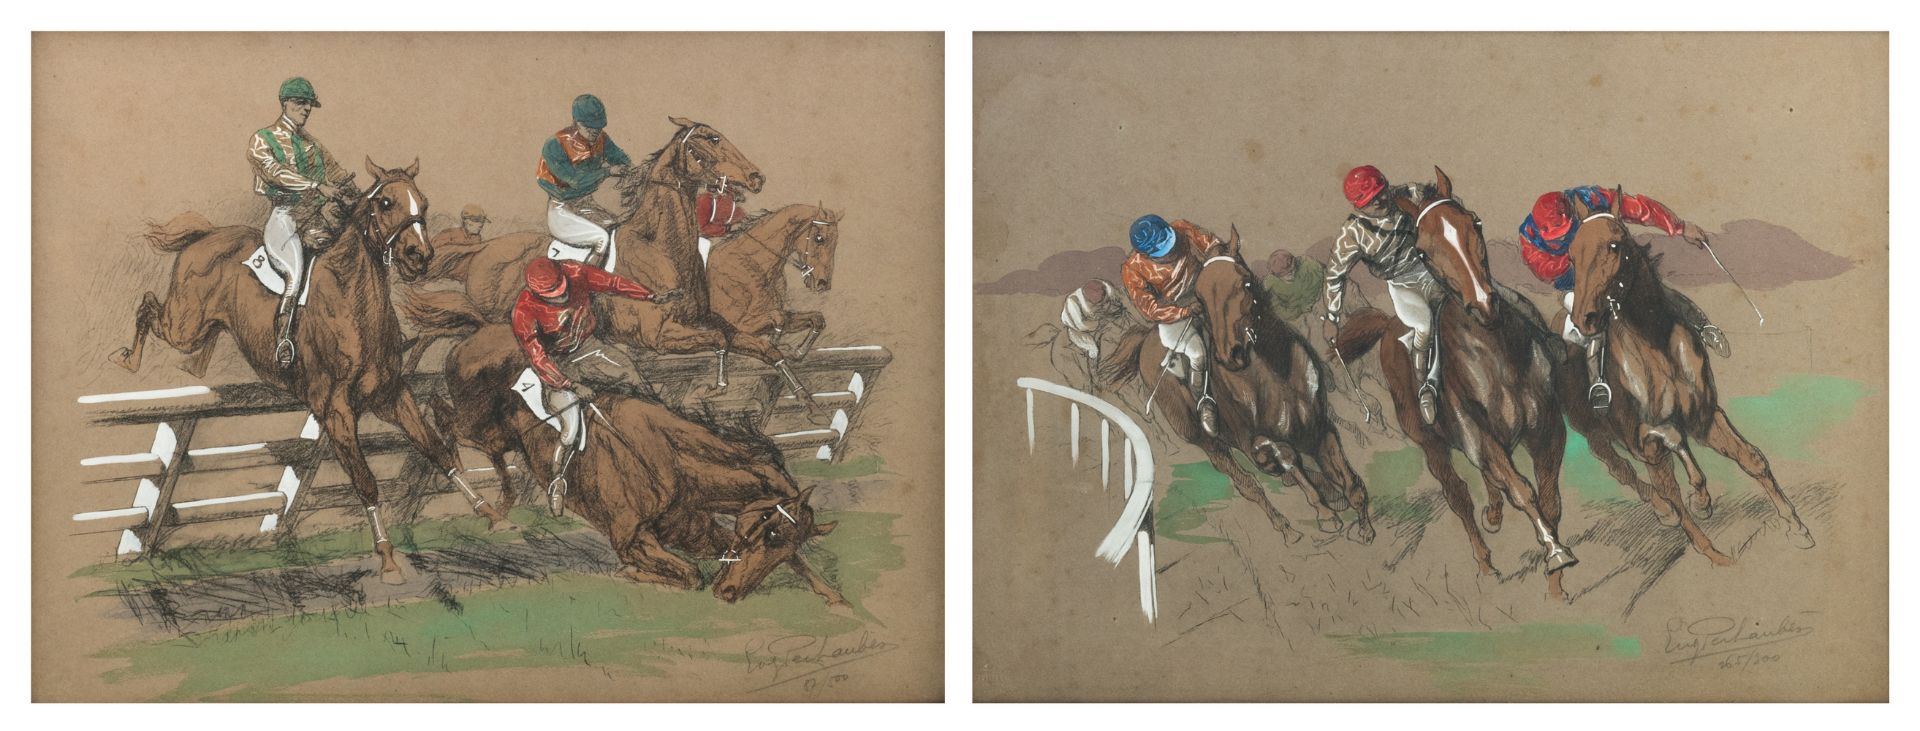 Péchaubes E., two hand coloured lithographs depicting a horse race, no. 87/500 and no. 265/300, 44,5